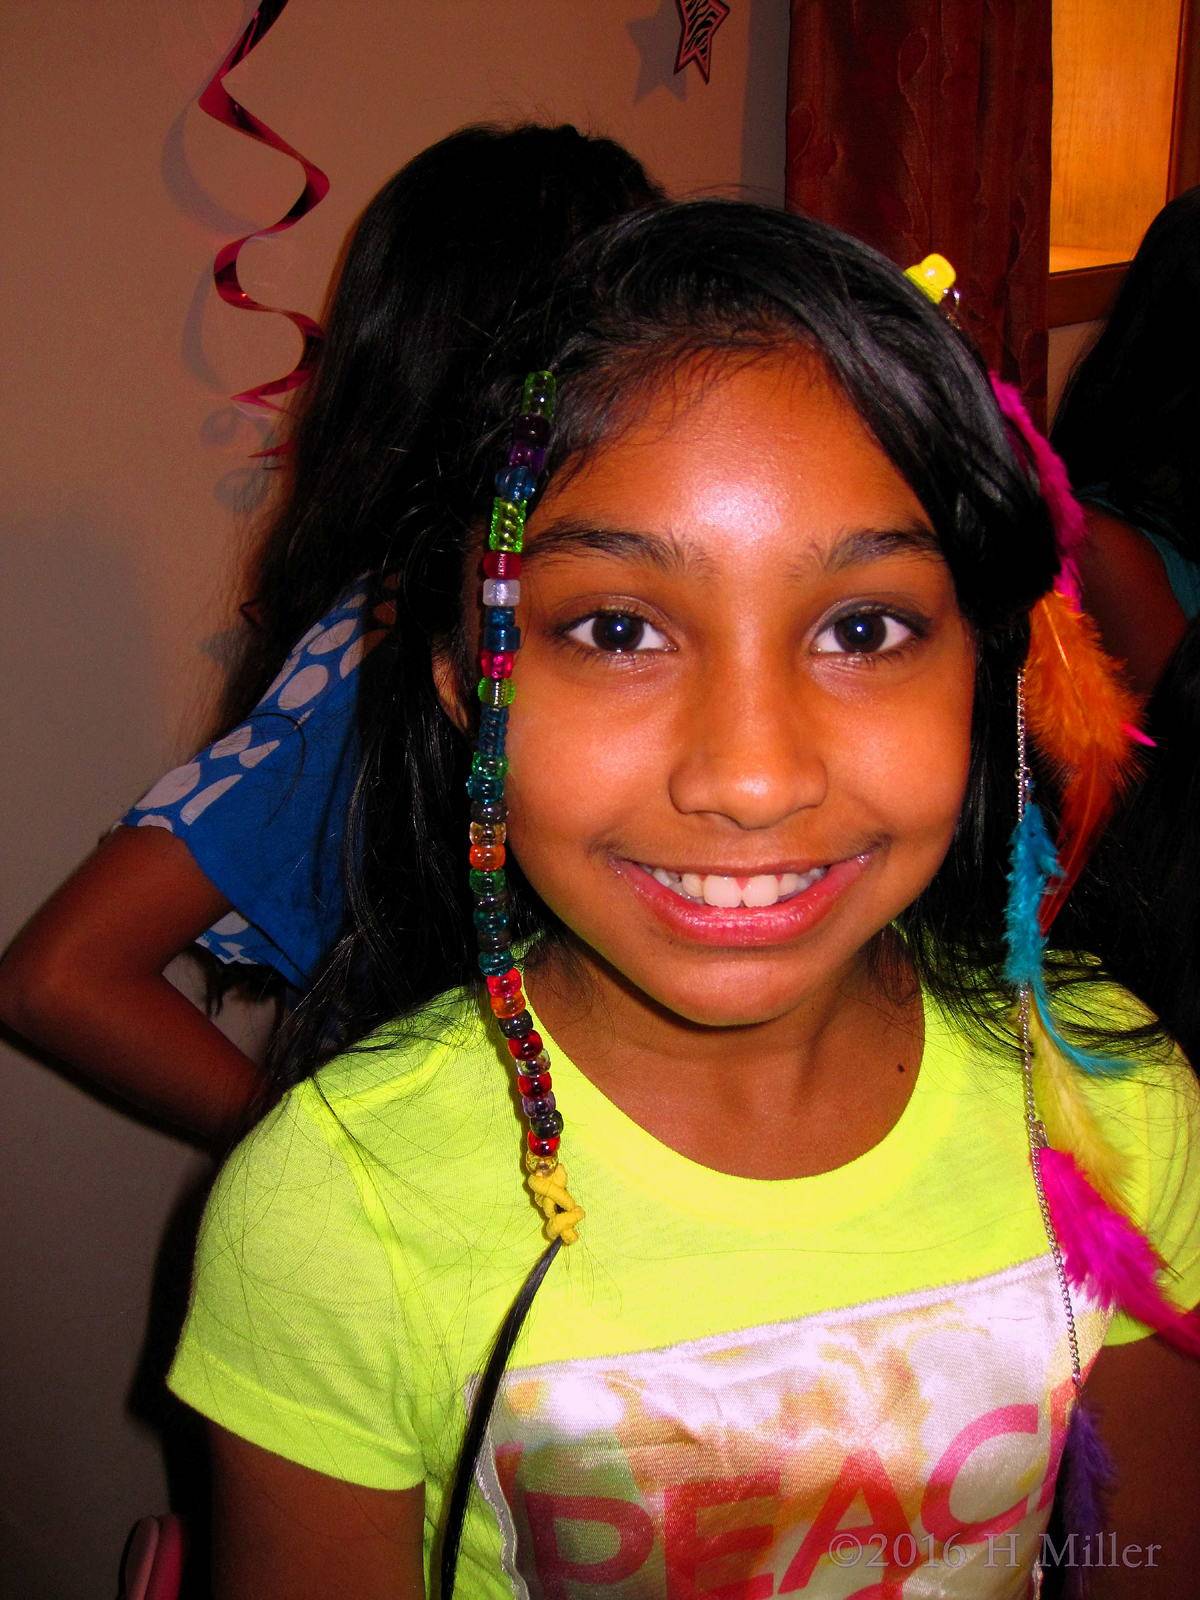 Looking Cute With A Beaded Hairstyle And A Feather Extension! 